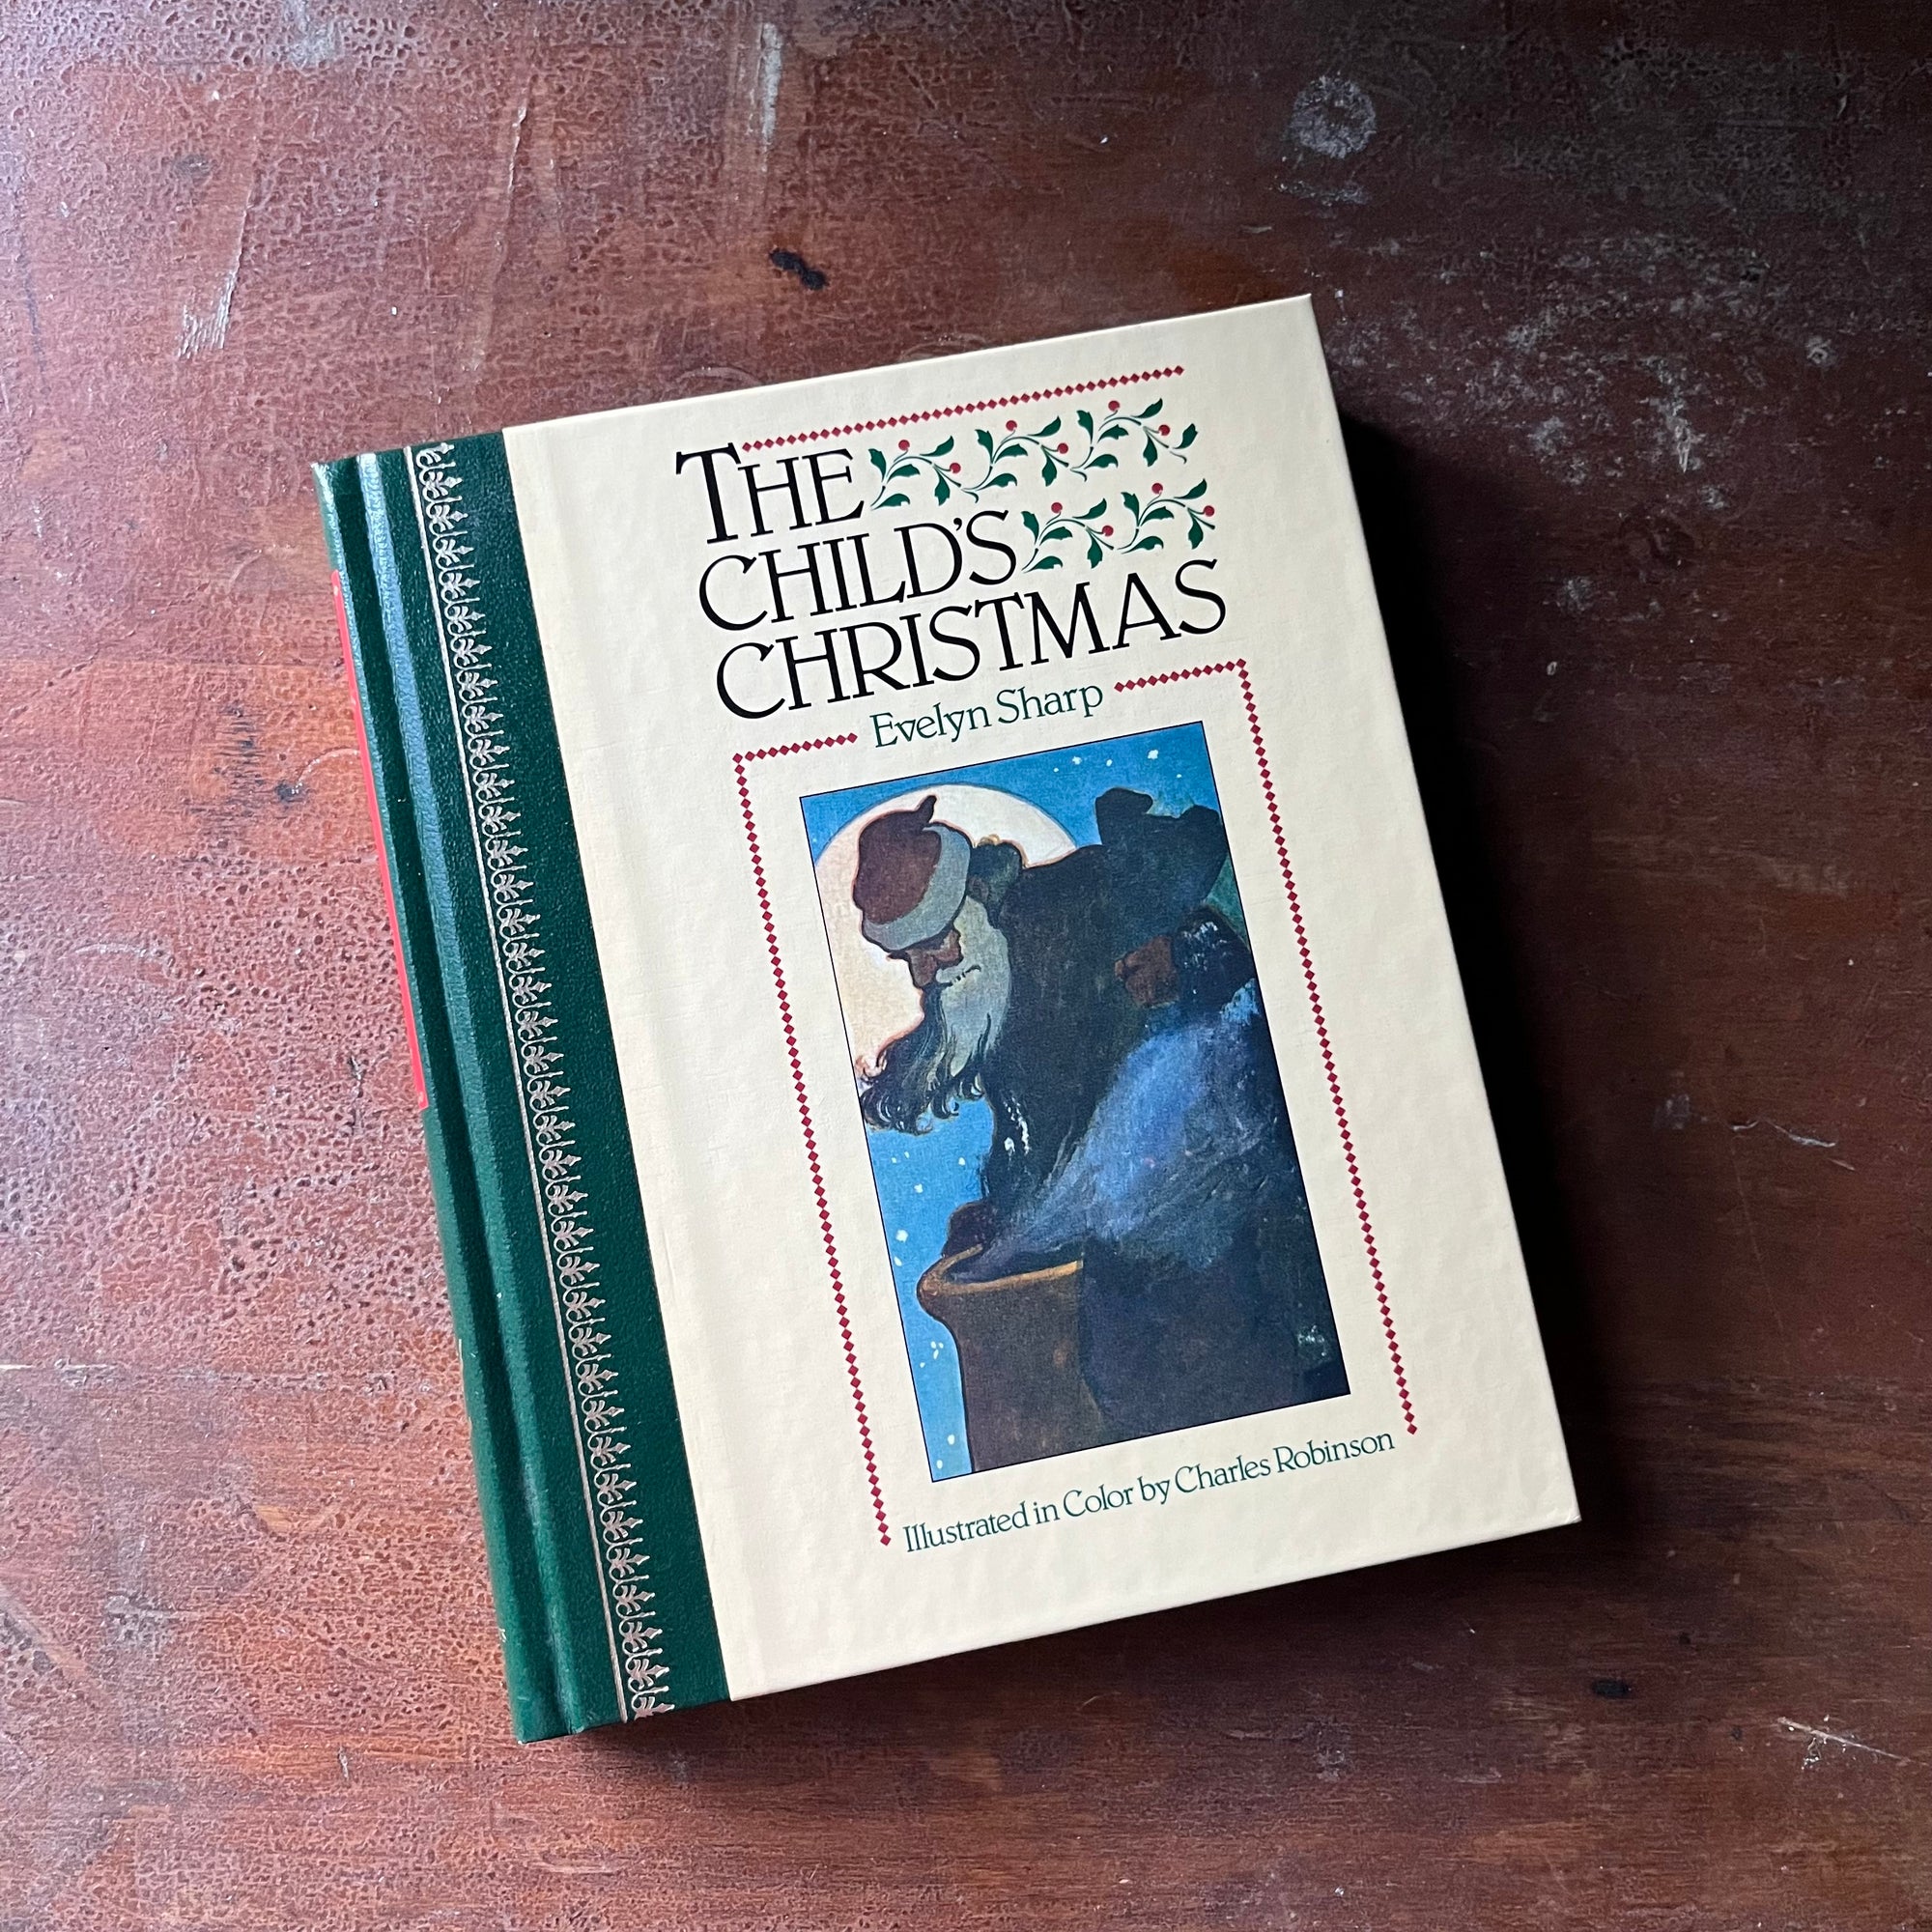 vintage children's Christmas book - The Children's Christmas written by Evelyn Sharp with illustrations by Charles Robinson - A Children's Classics Book - view of the glossy front cover with an illustration of Santa going down a chimney